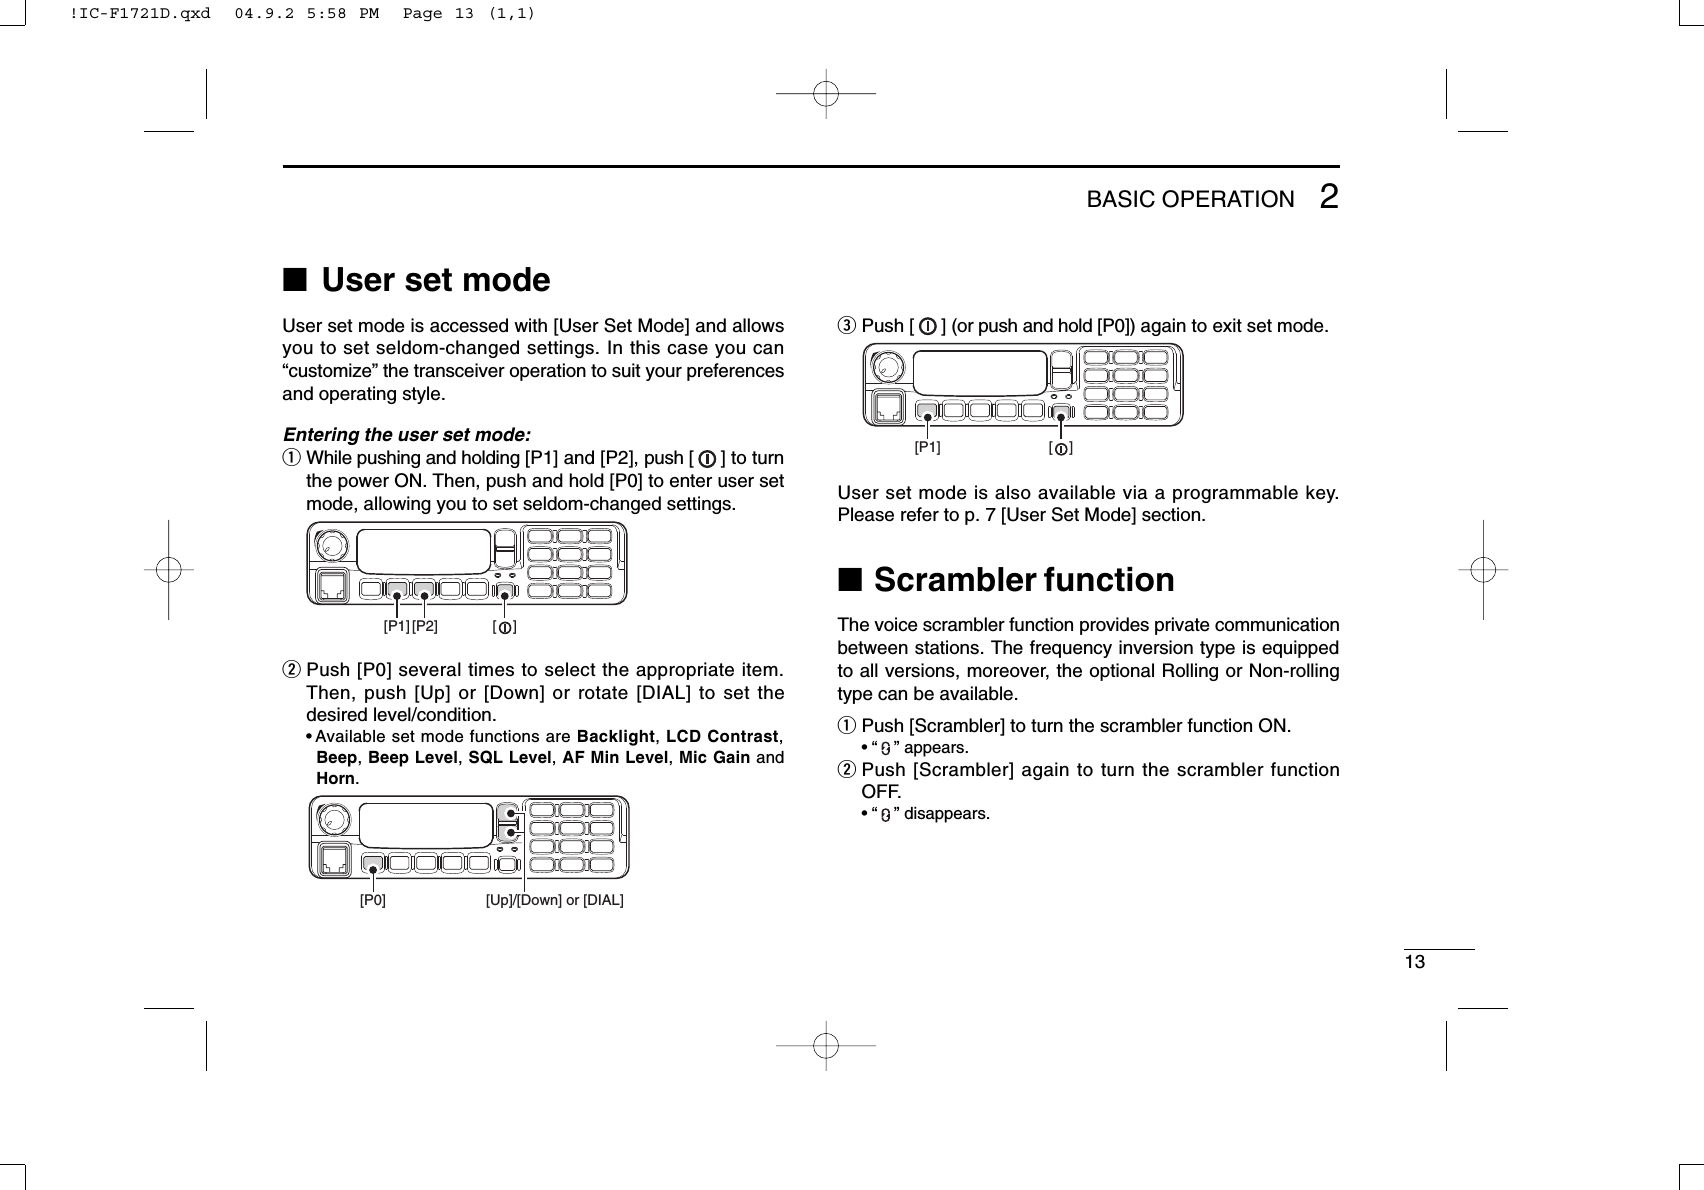 132BASIC OPERATION■User set modeUser set mode is accessed with [User Set Mode] and allowsyou to set seldom-changed settings. In this case you can“customize” the transceiver operation to suit your preferencesand operating style.Entering the user set mode:qWhile pushing and holding [P1] and [P2], push [ ] to turnthe power ON. Then, push and hold [P0] to enter user setmode, allowing you to set seldom-changed settings.wPush [P0] several times to select the appropriate item.Then, push [Up] or [Down] or rotate [DIAL] to set thedesired level/condition.• Available set mode functions are Backlight, LCD Contrast,Beep, Beep Level, SQL Level, AF Min Level, Mic Gain andHorn.ePush [ ] (or push and hold [P0]) again to exit set mode.User set mode is also available via a programmable key.Please refer to p. 7 [User Set Mode] section.■Scrambler functionThe voice scrambler function provides private communicationbetween stations. The frequency inversion type is equippedto all versions, moreover, the optional Rolling or Non-rollingtype can be available.qPush [Scrambler] to turn the scrambler function ON.• “” appears.wPush [Scrambler] again to turn the scrambler functionOFF.• “” disappears.[P1] [    ][P0] [Up]/[Down] or [DIAL][P1] [P2] [    ]!IC-F1721D.qxd  04.9.2 5:58 PM  Page 13 (1,1)